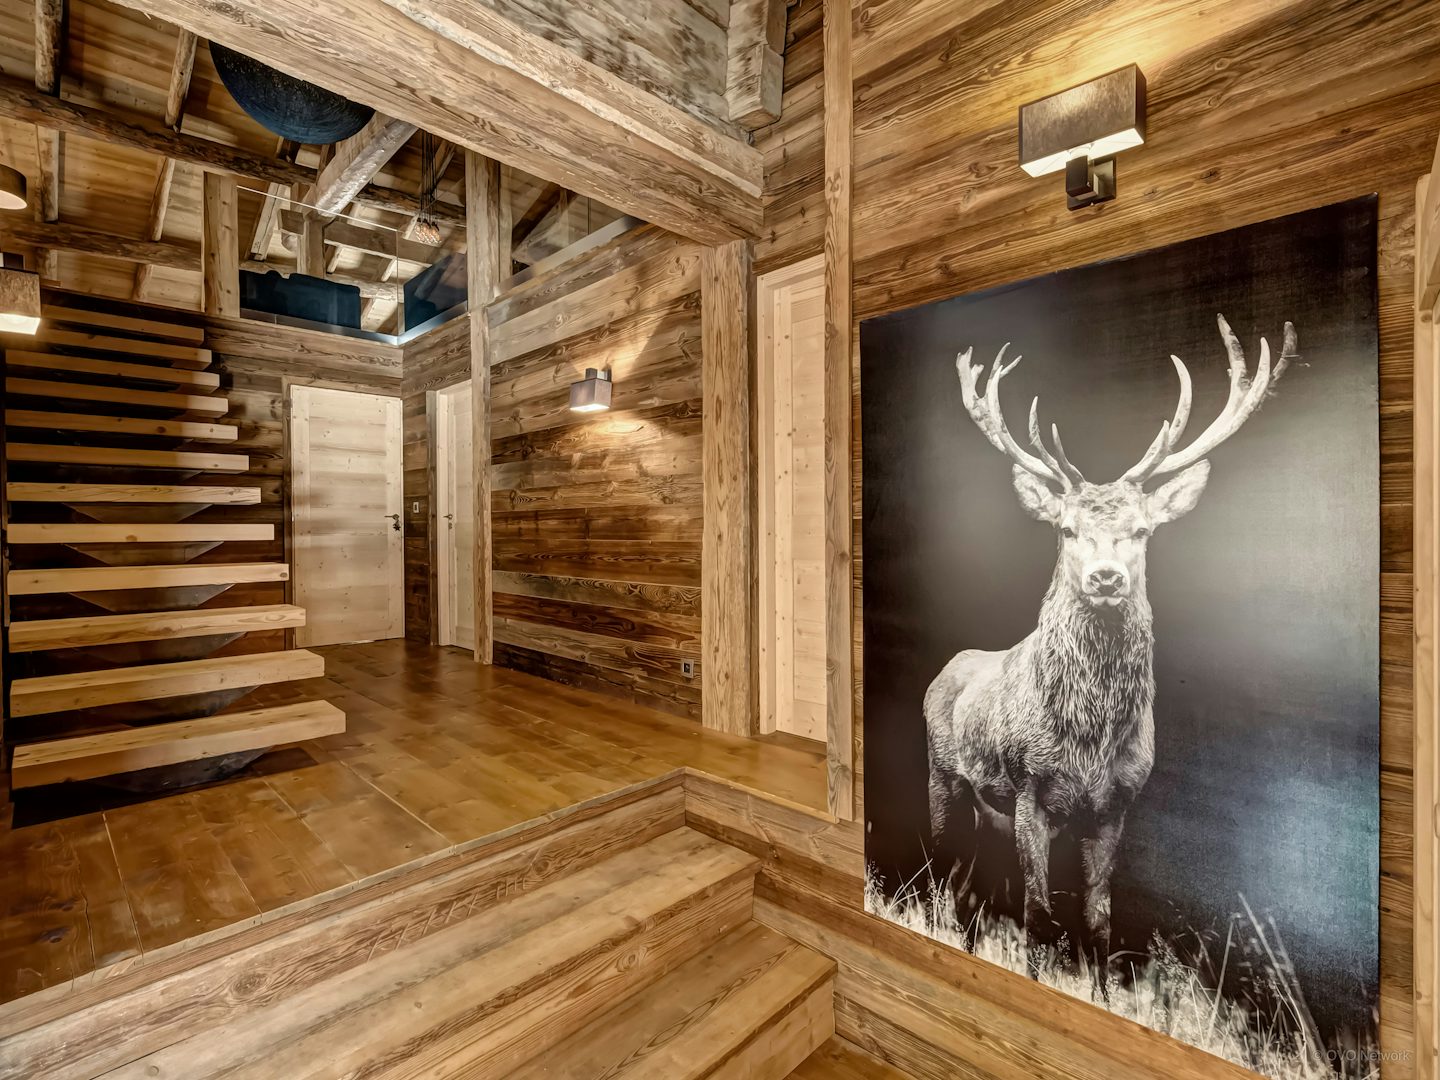 The stairwell at Chalet Victorina with a large stag head image and wooden interiors.